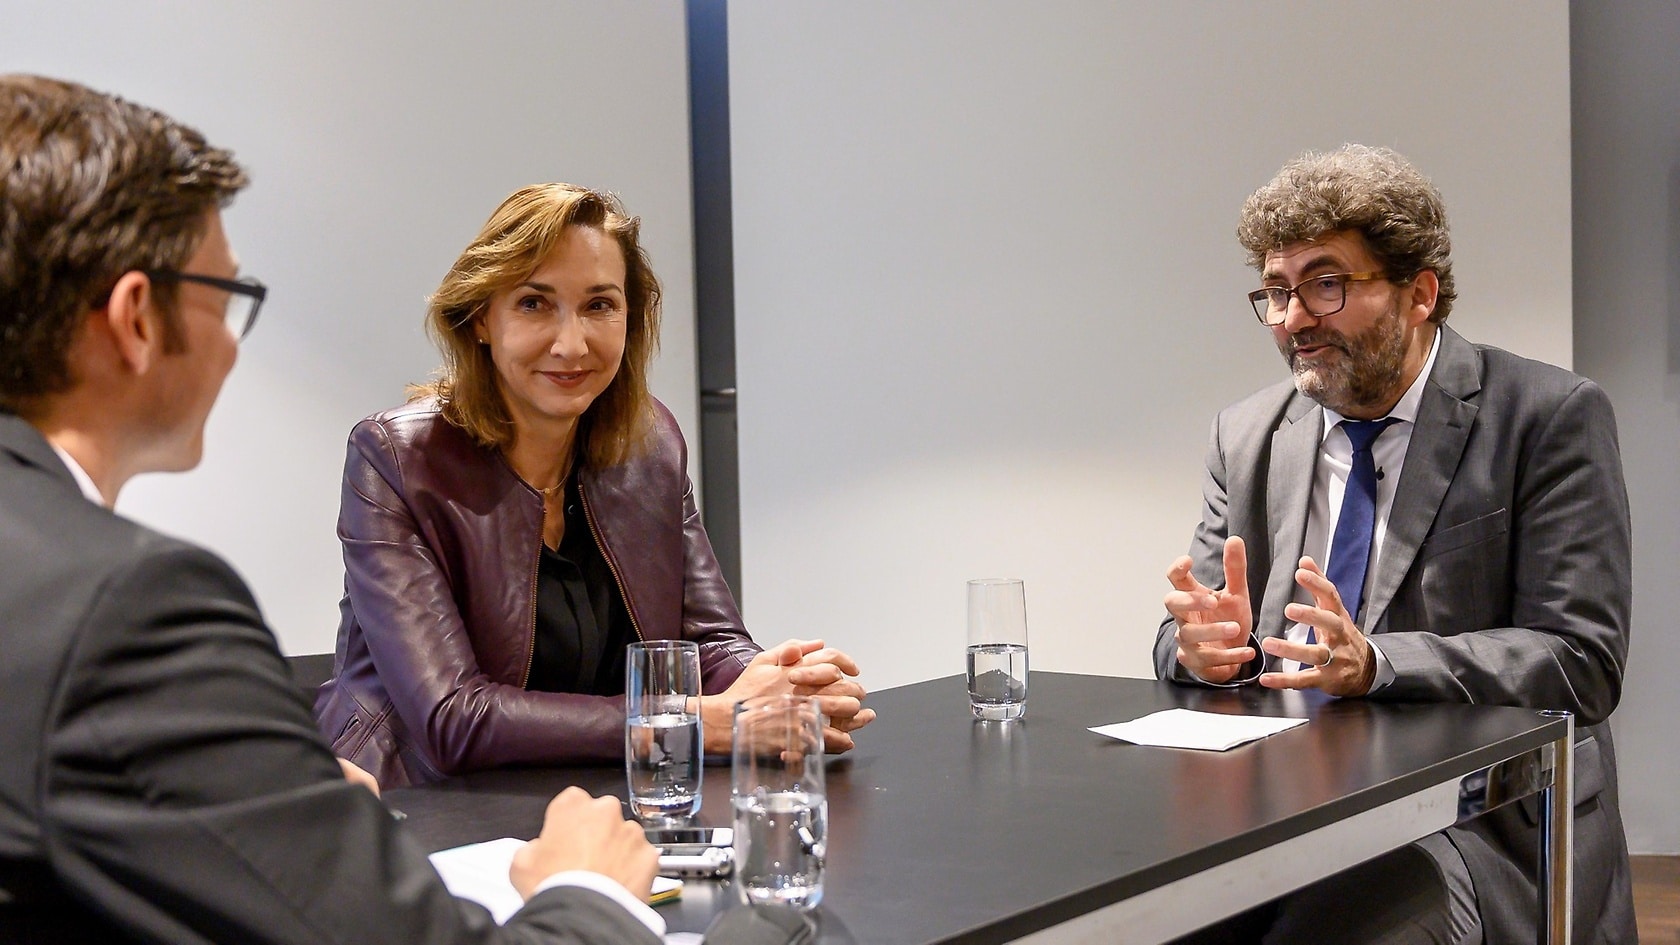 Renata Jungo Brüngger, member of the Board of Management of Daimler AG and Mercedes-Benz AG responsible for Integrity and Legal Affairs, and Michael Windfuhr from the German Institute for Human Rights